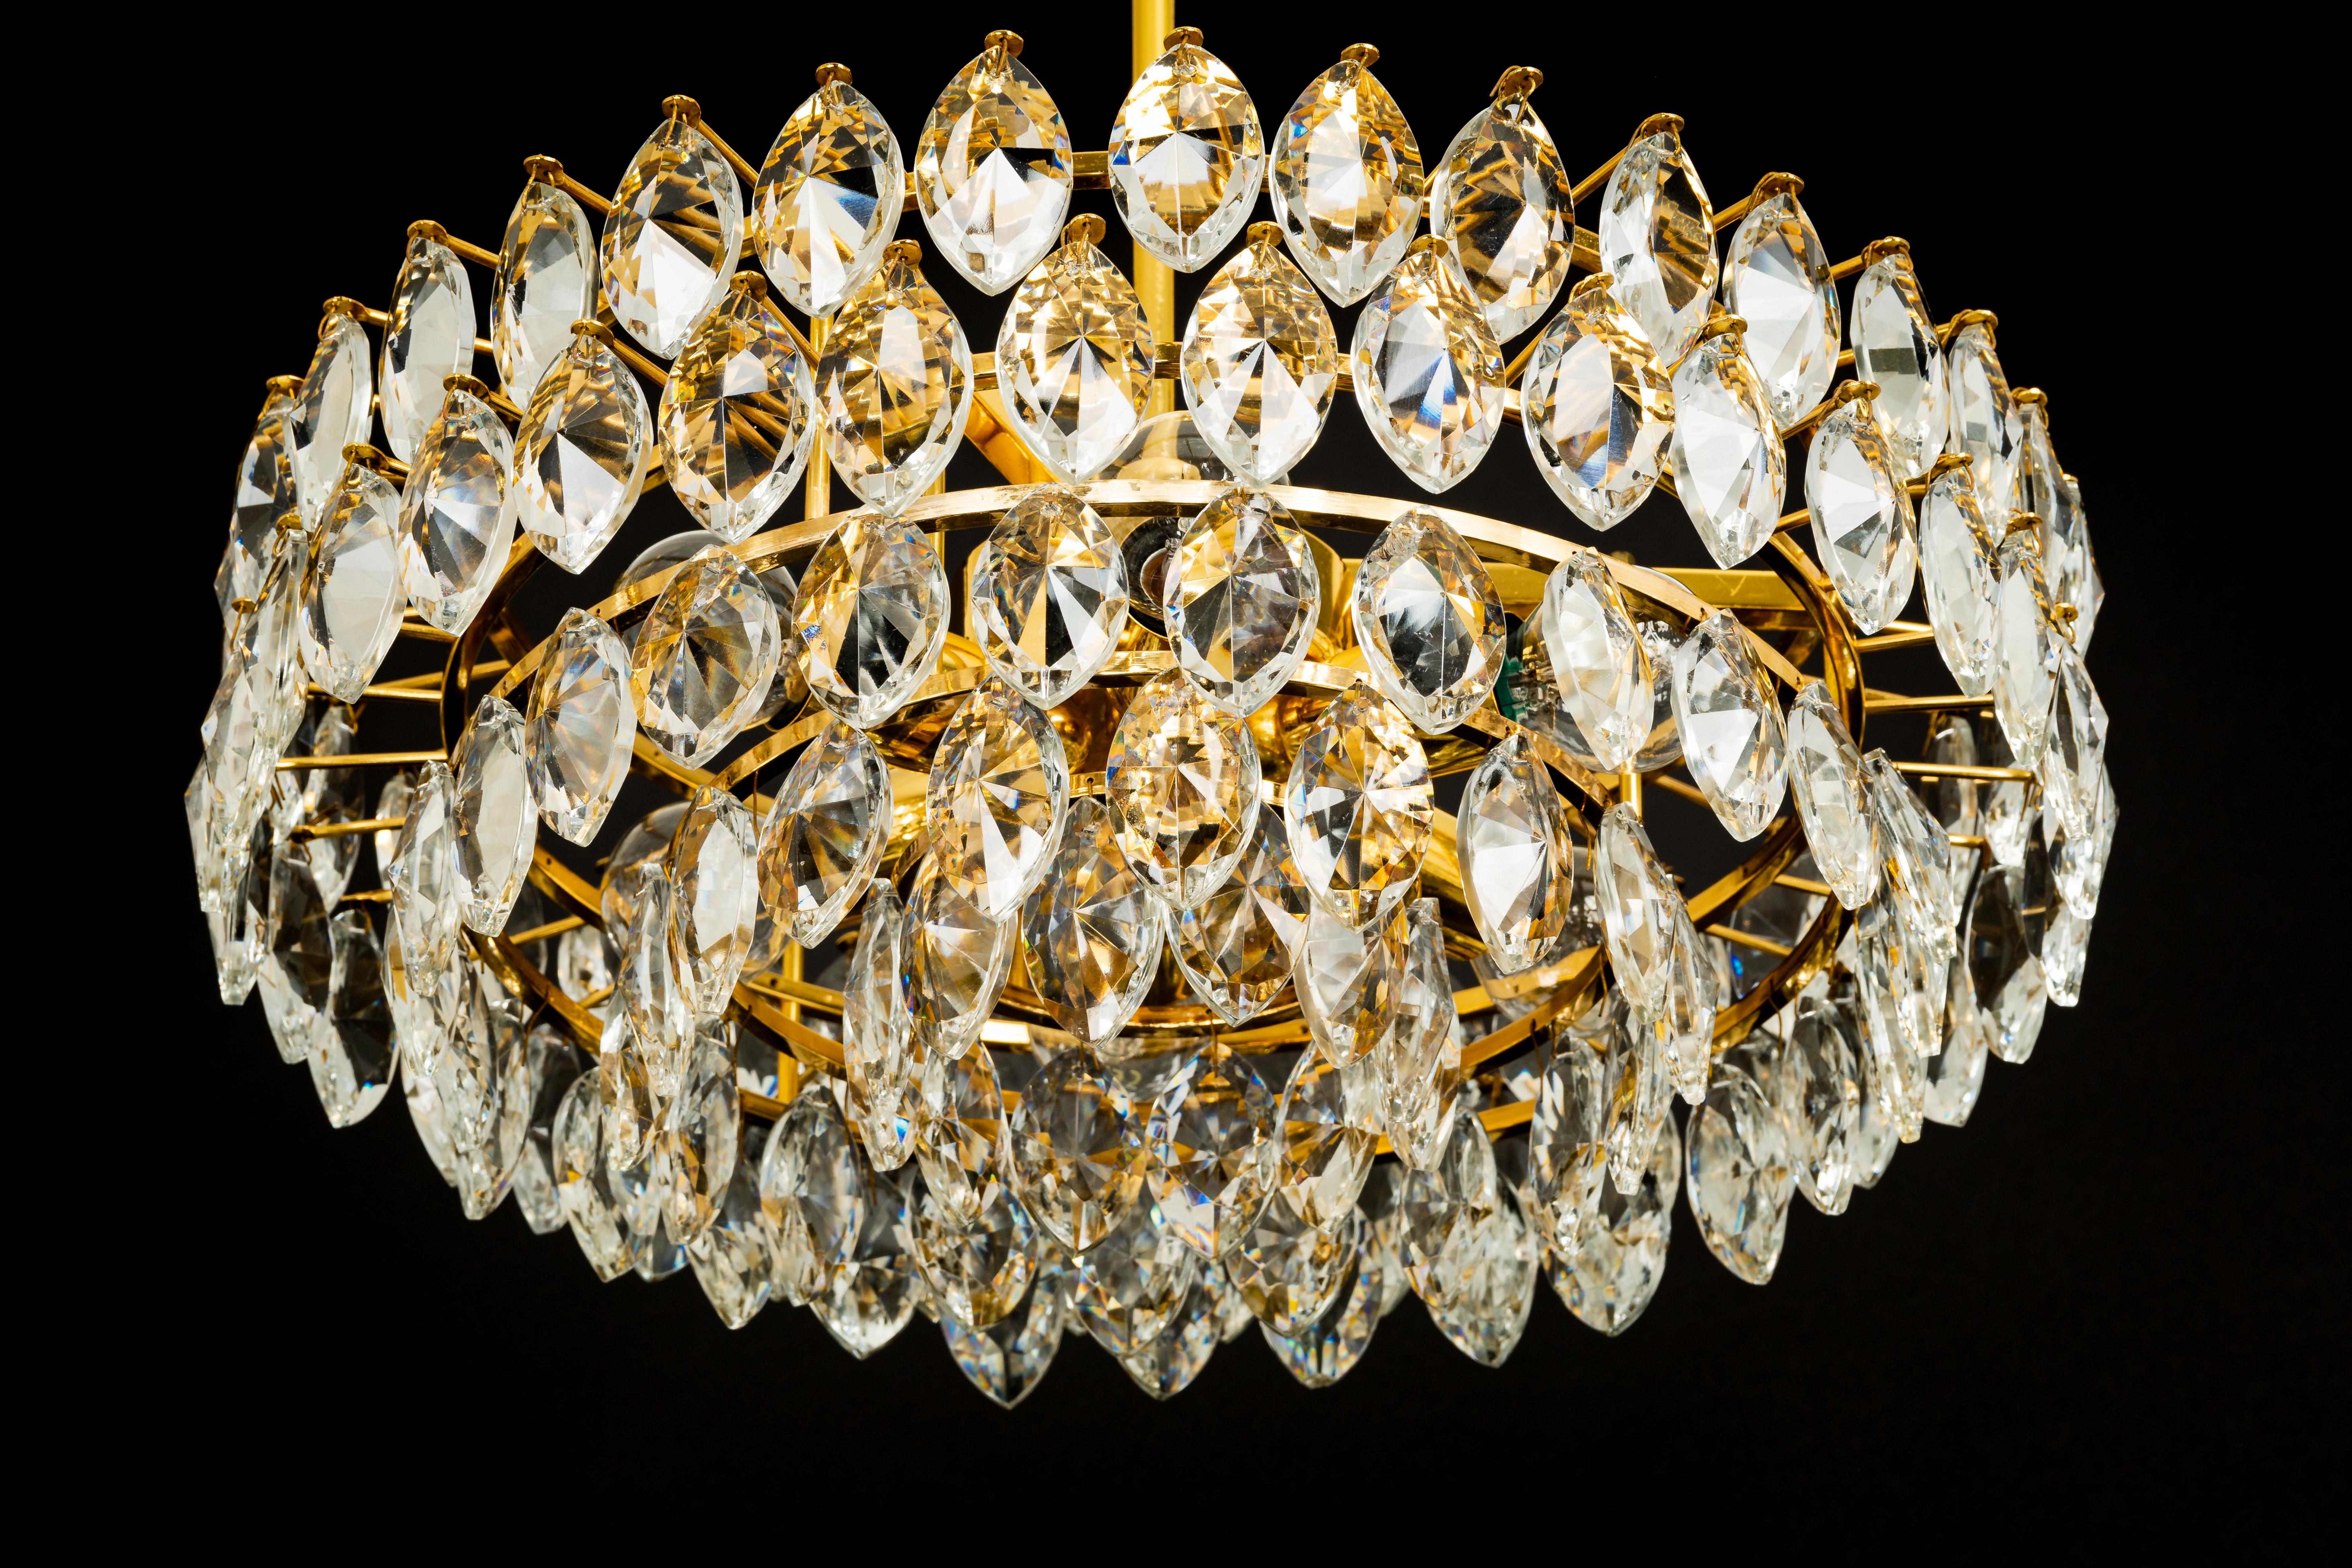 Bakalowits Chandelier Brass and Crystal Glass, Austria, 1960s For Sale 5